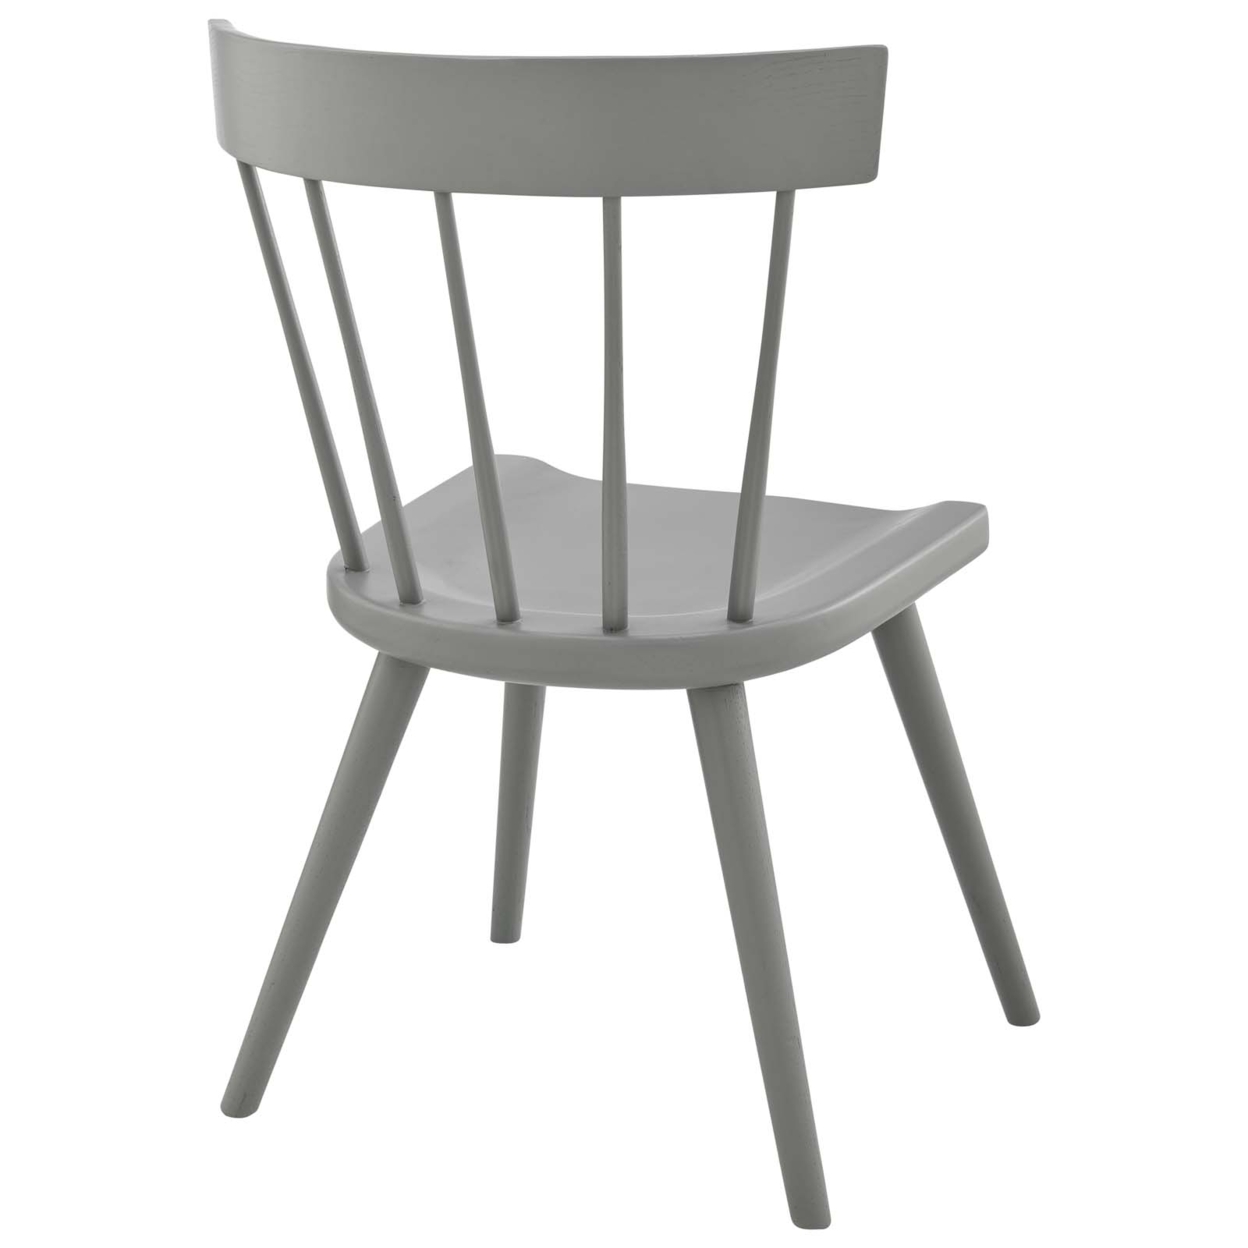 Sutter Wood Dining Side Chair, Light Gray